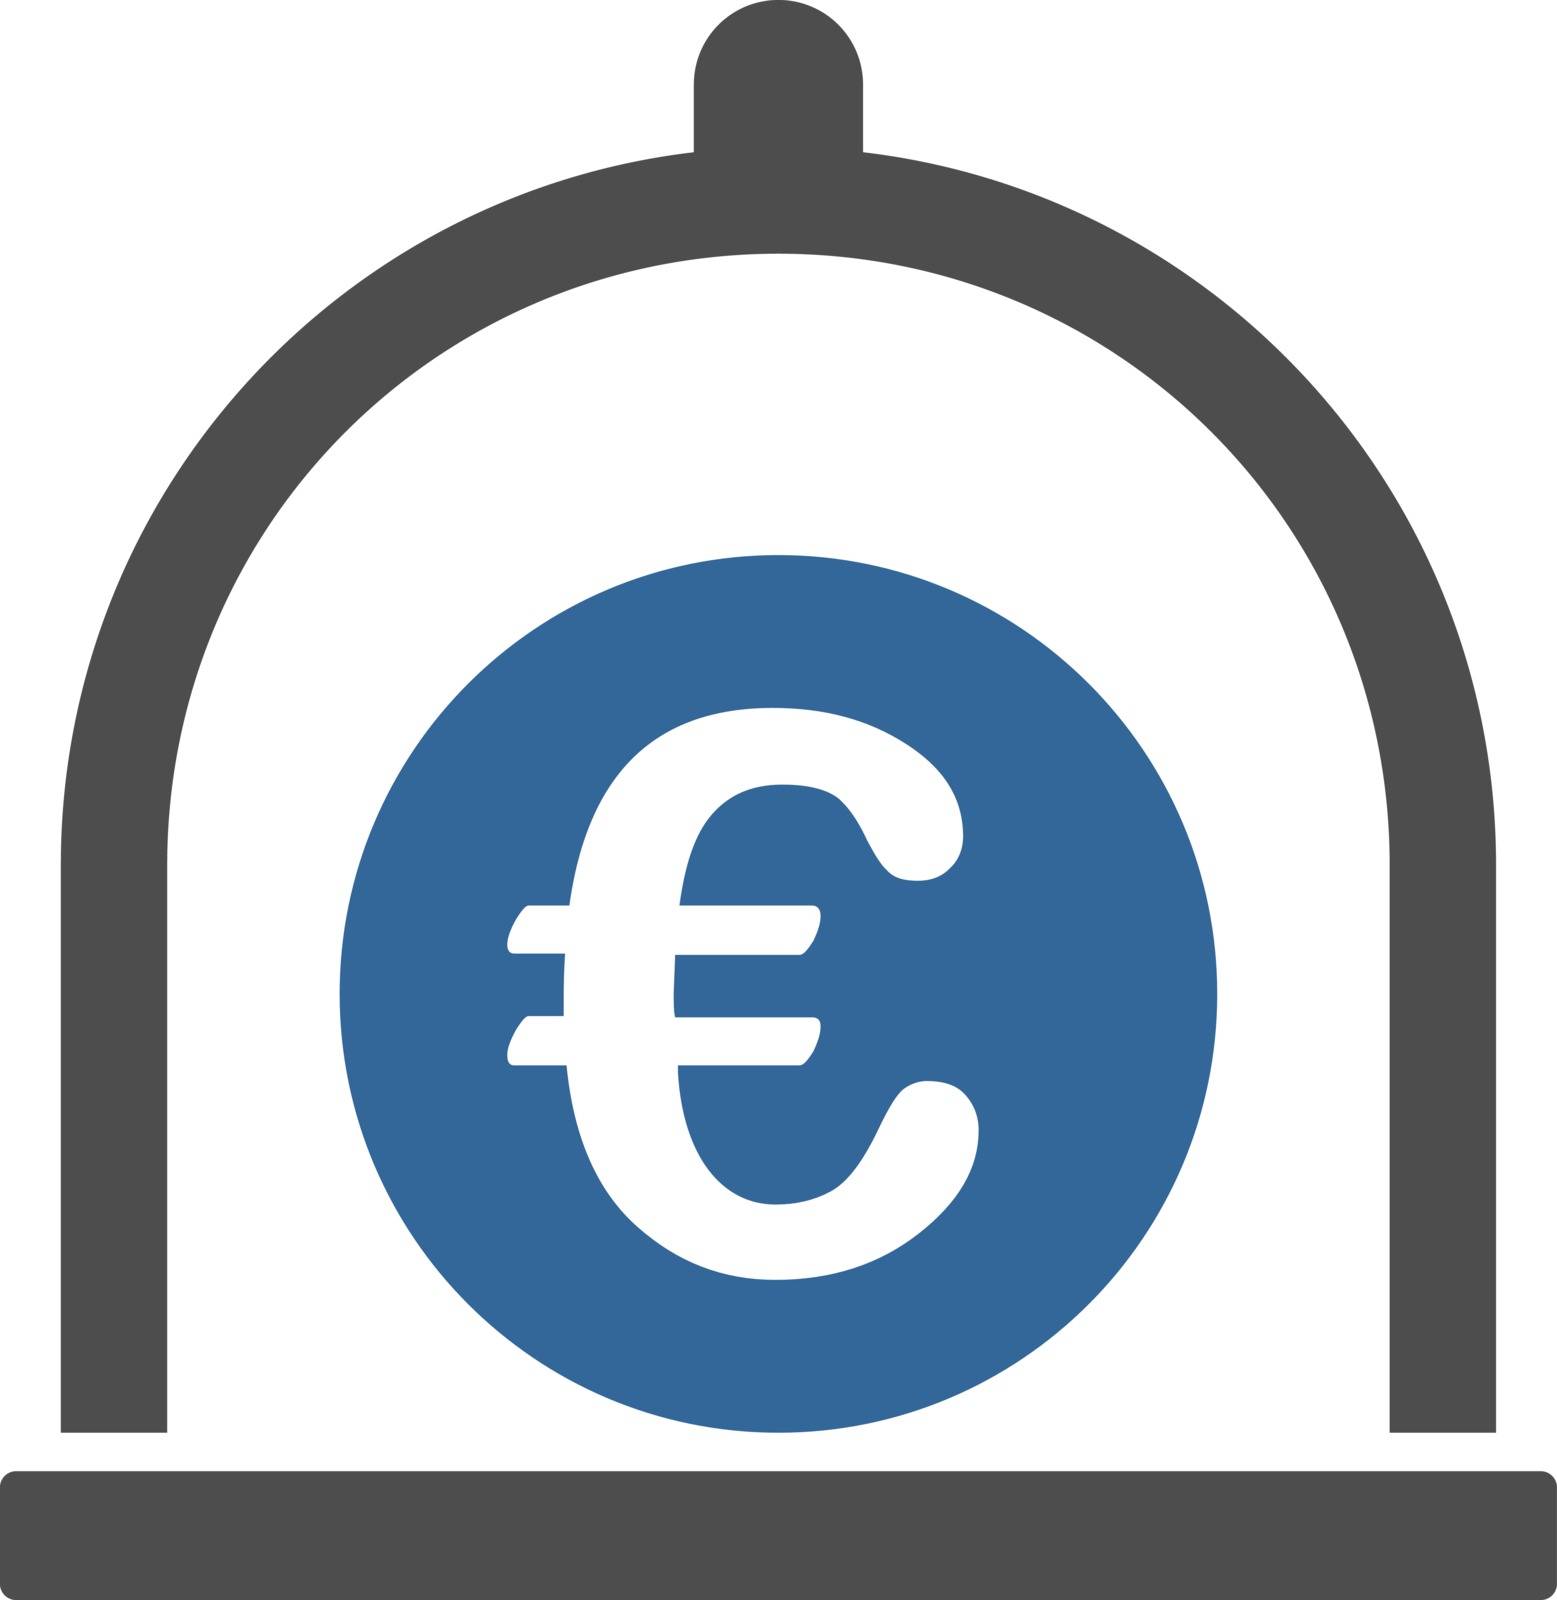 Euro standard icon from Business Bicolor Set by ahasoft